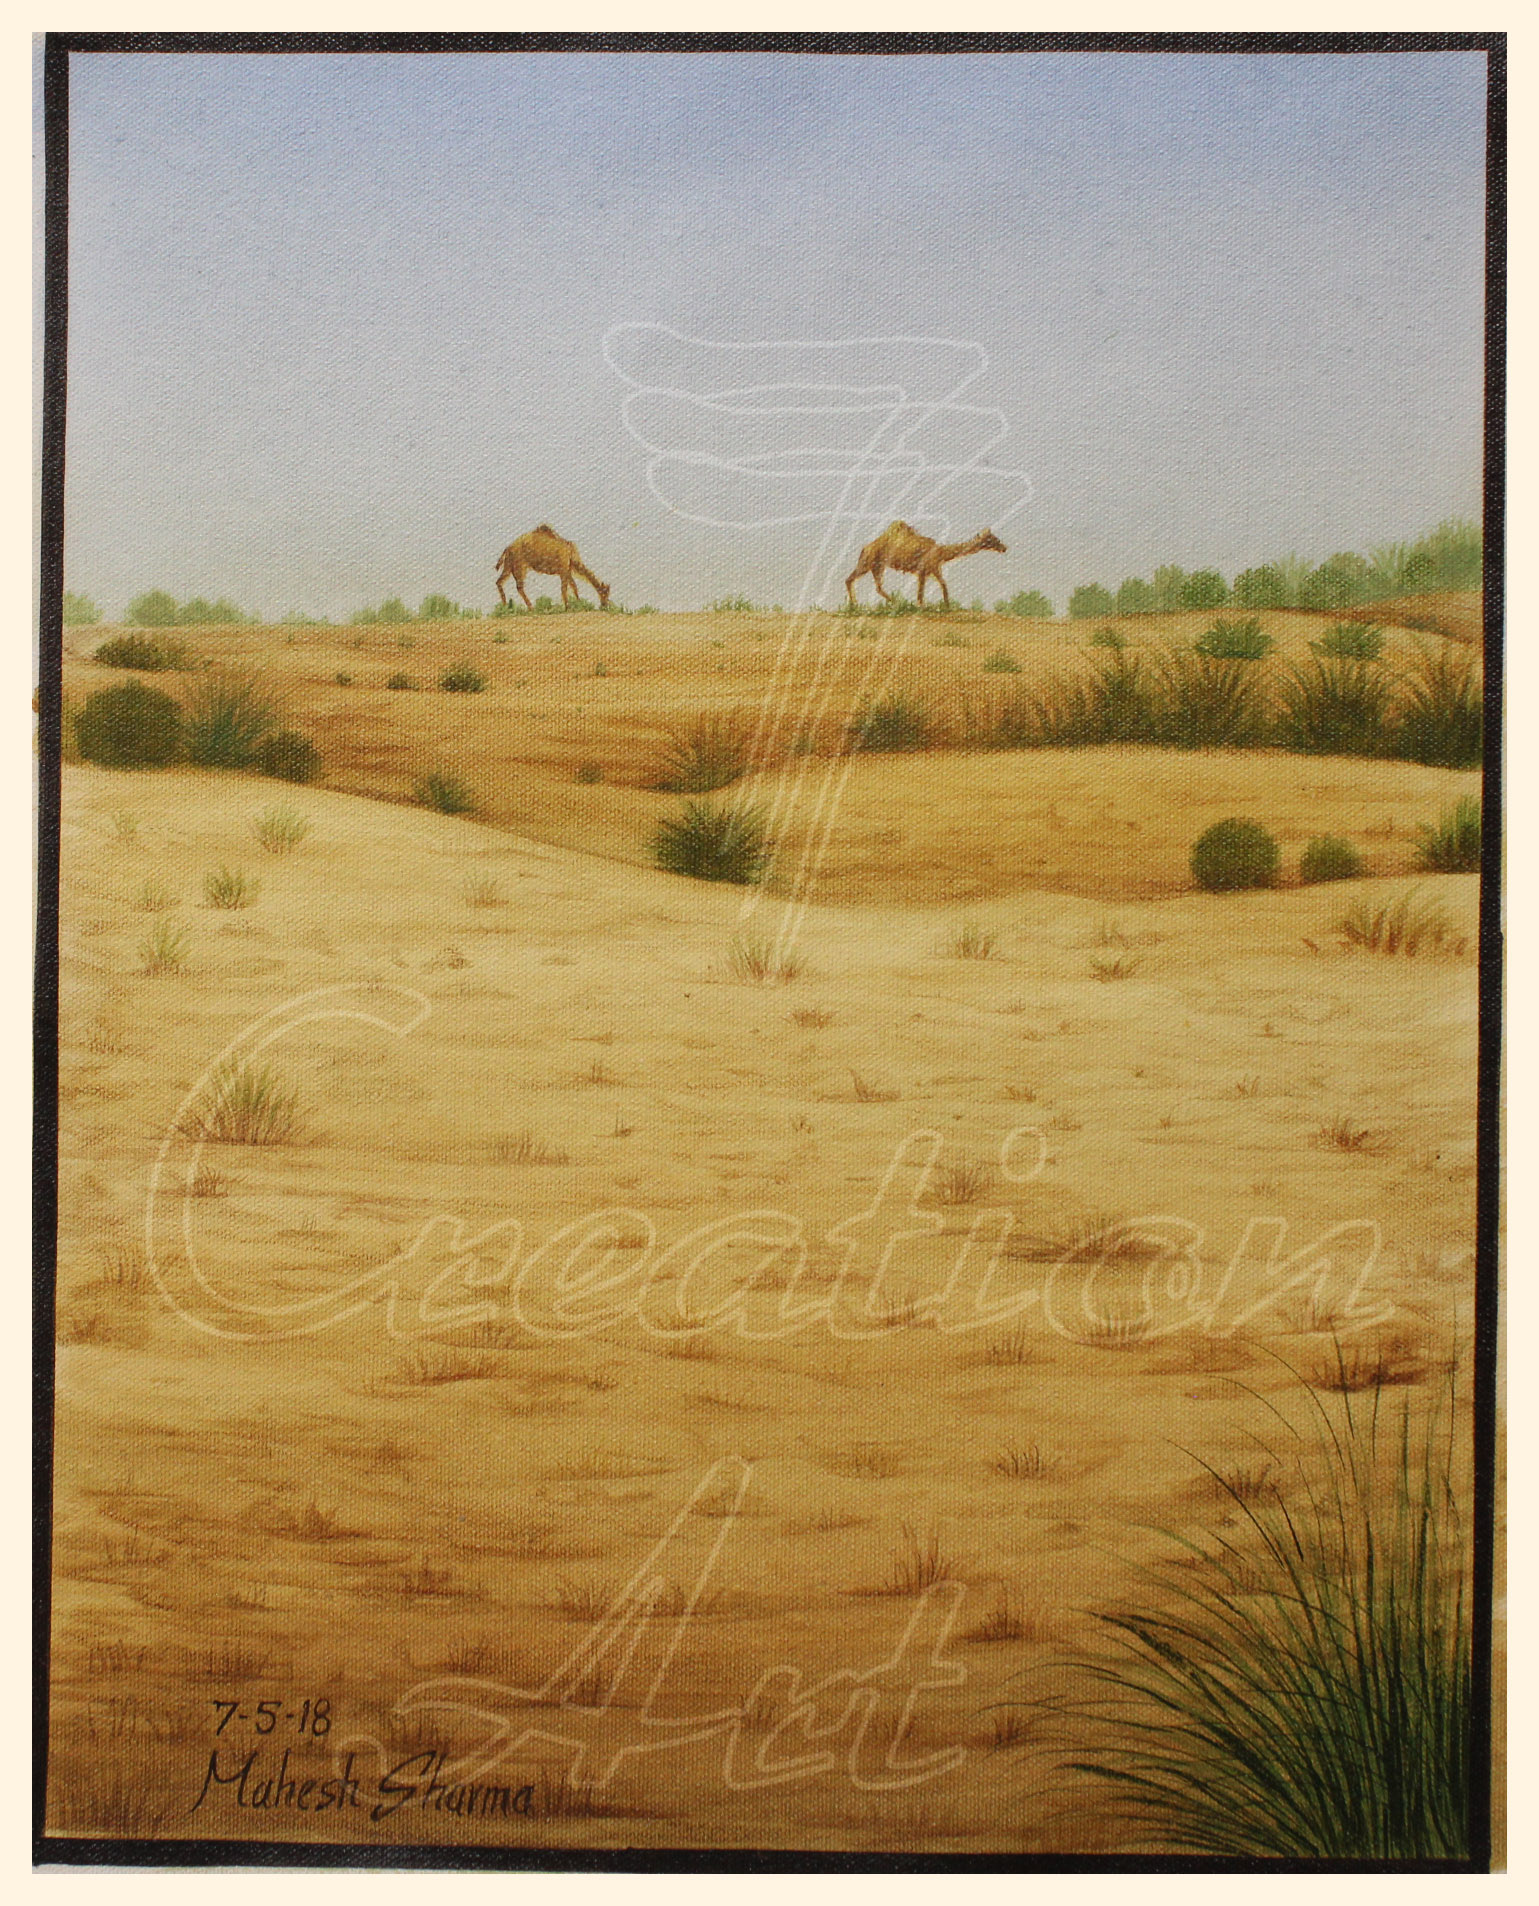 Thar Desert, The Great Indian Desert, Spectacular Landscapes of India, Canvas Painting 7Creation Art